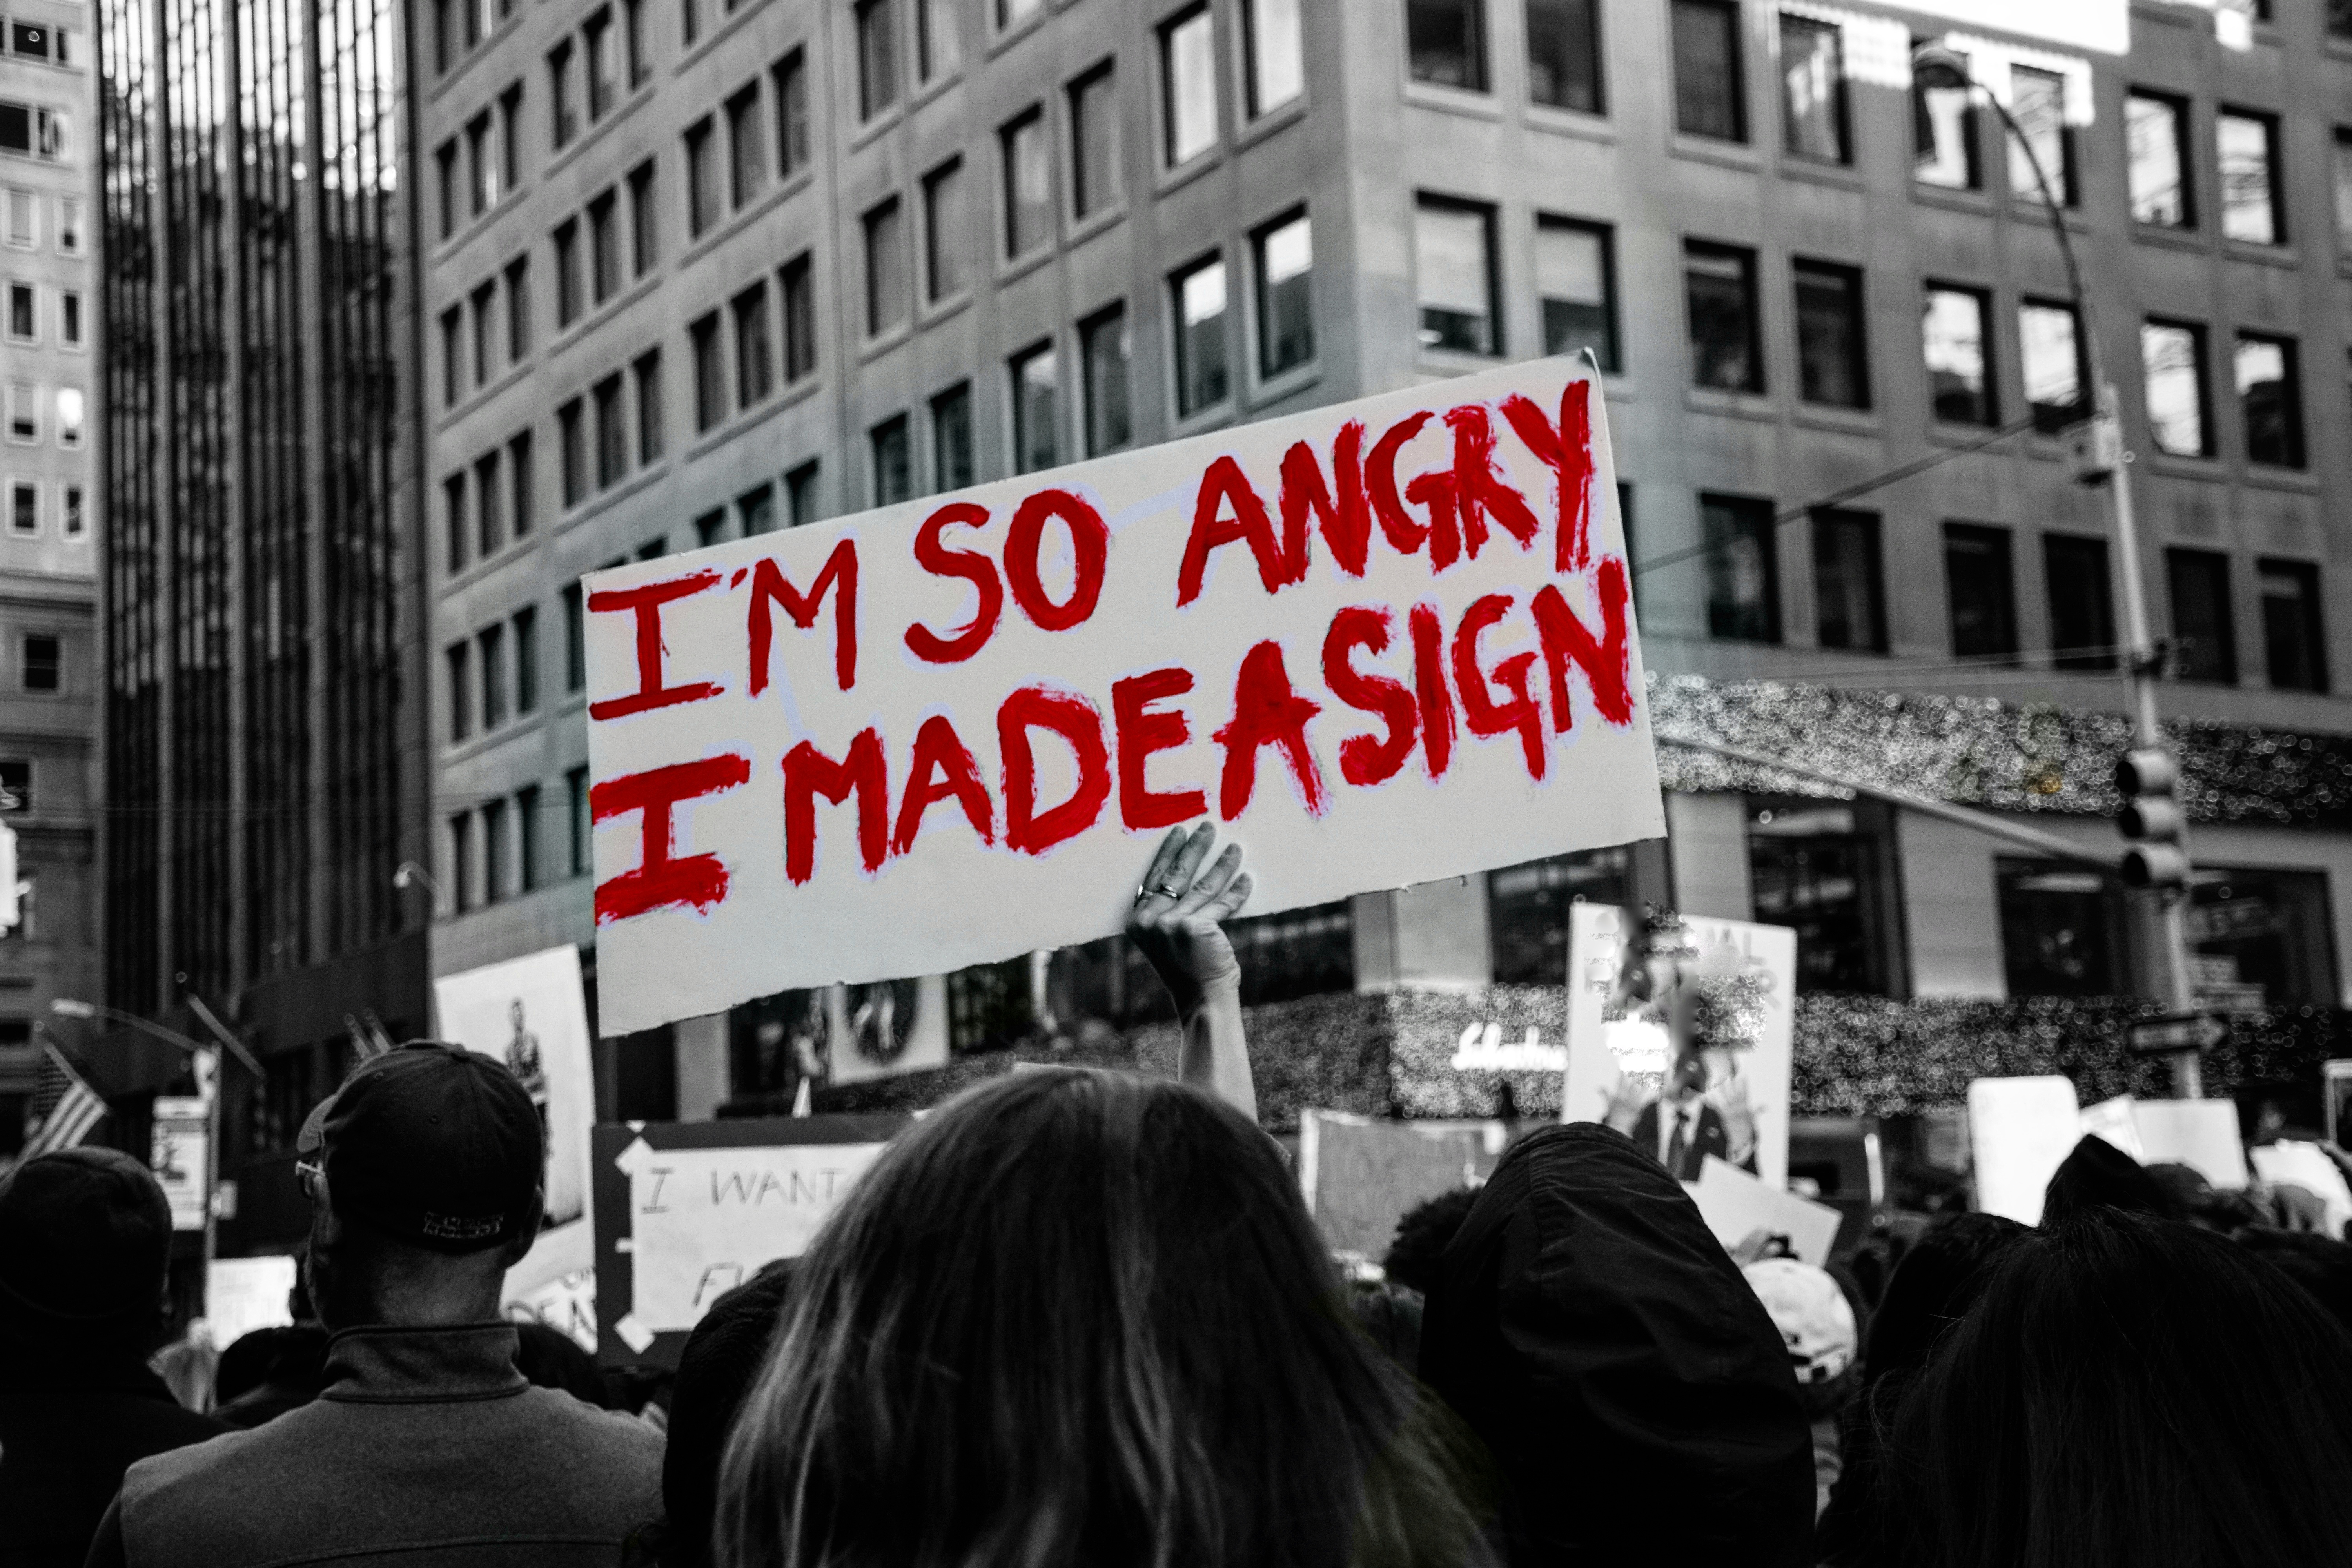 protesters with a sign which reads "I'm so angry I made a sign"